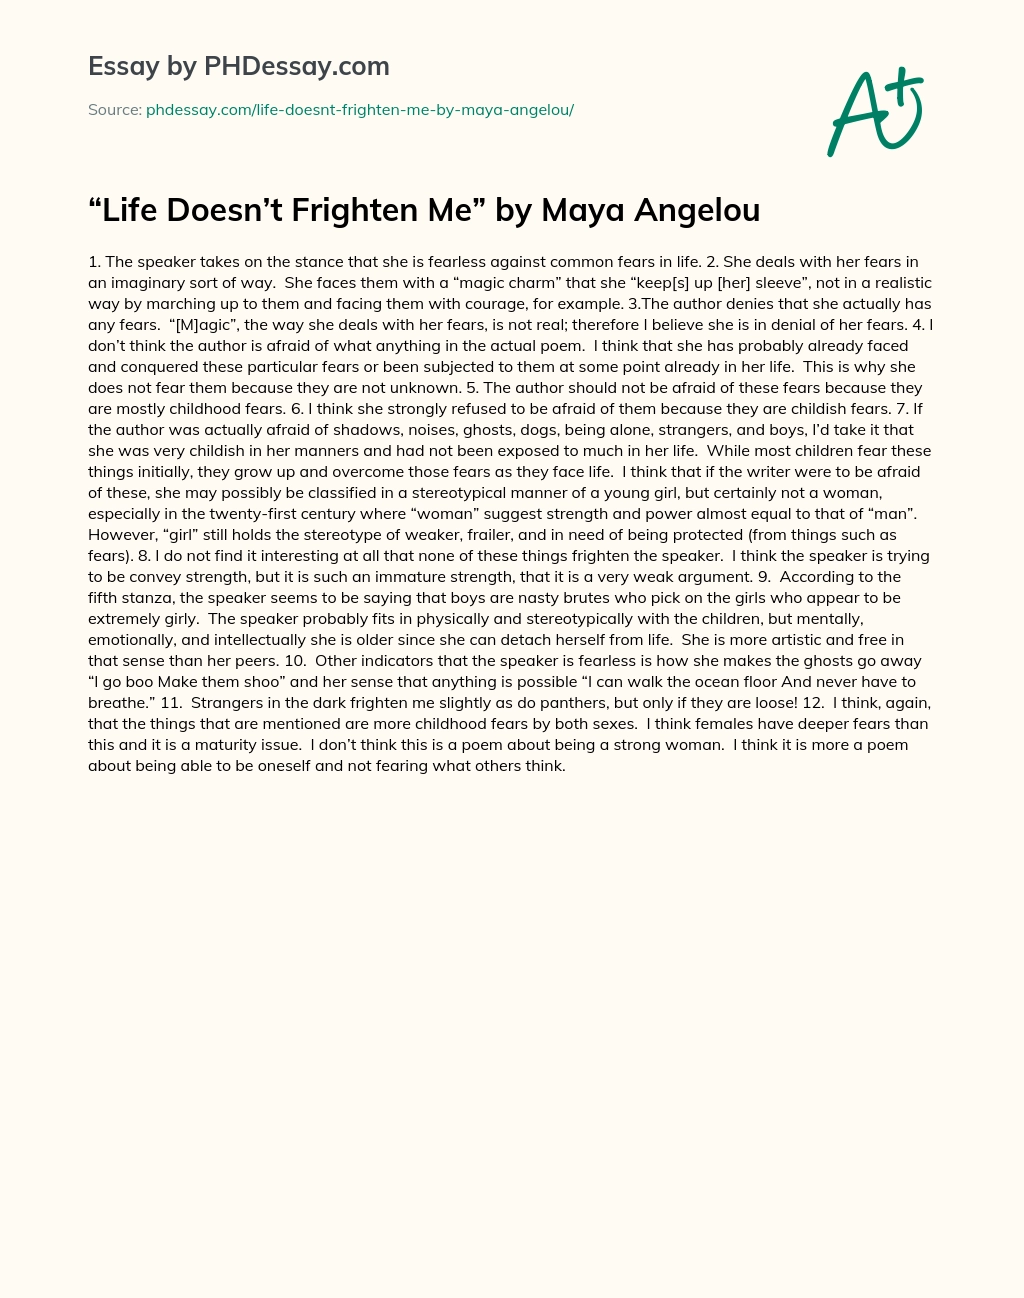 Life Doesnt Frighten Me by Maya Angelou essay